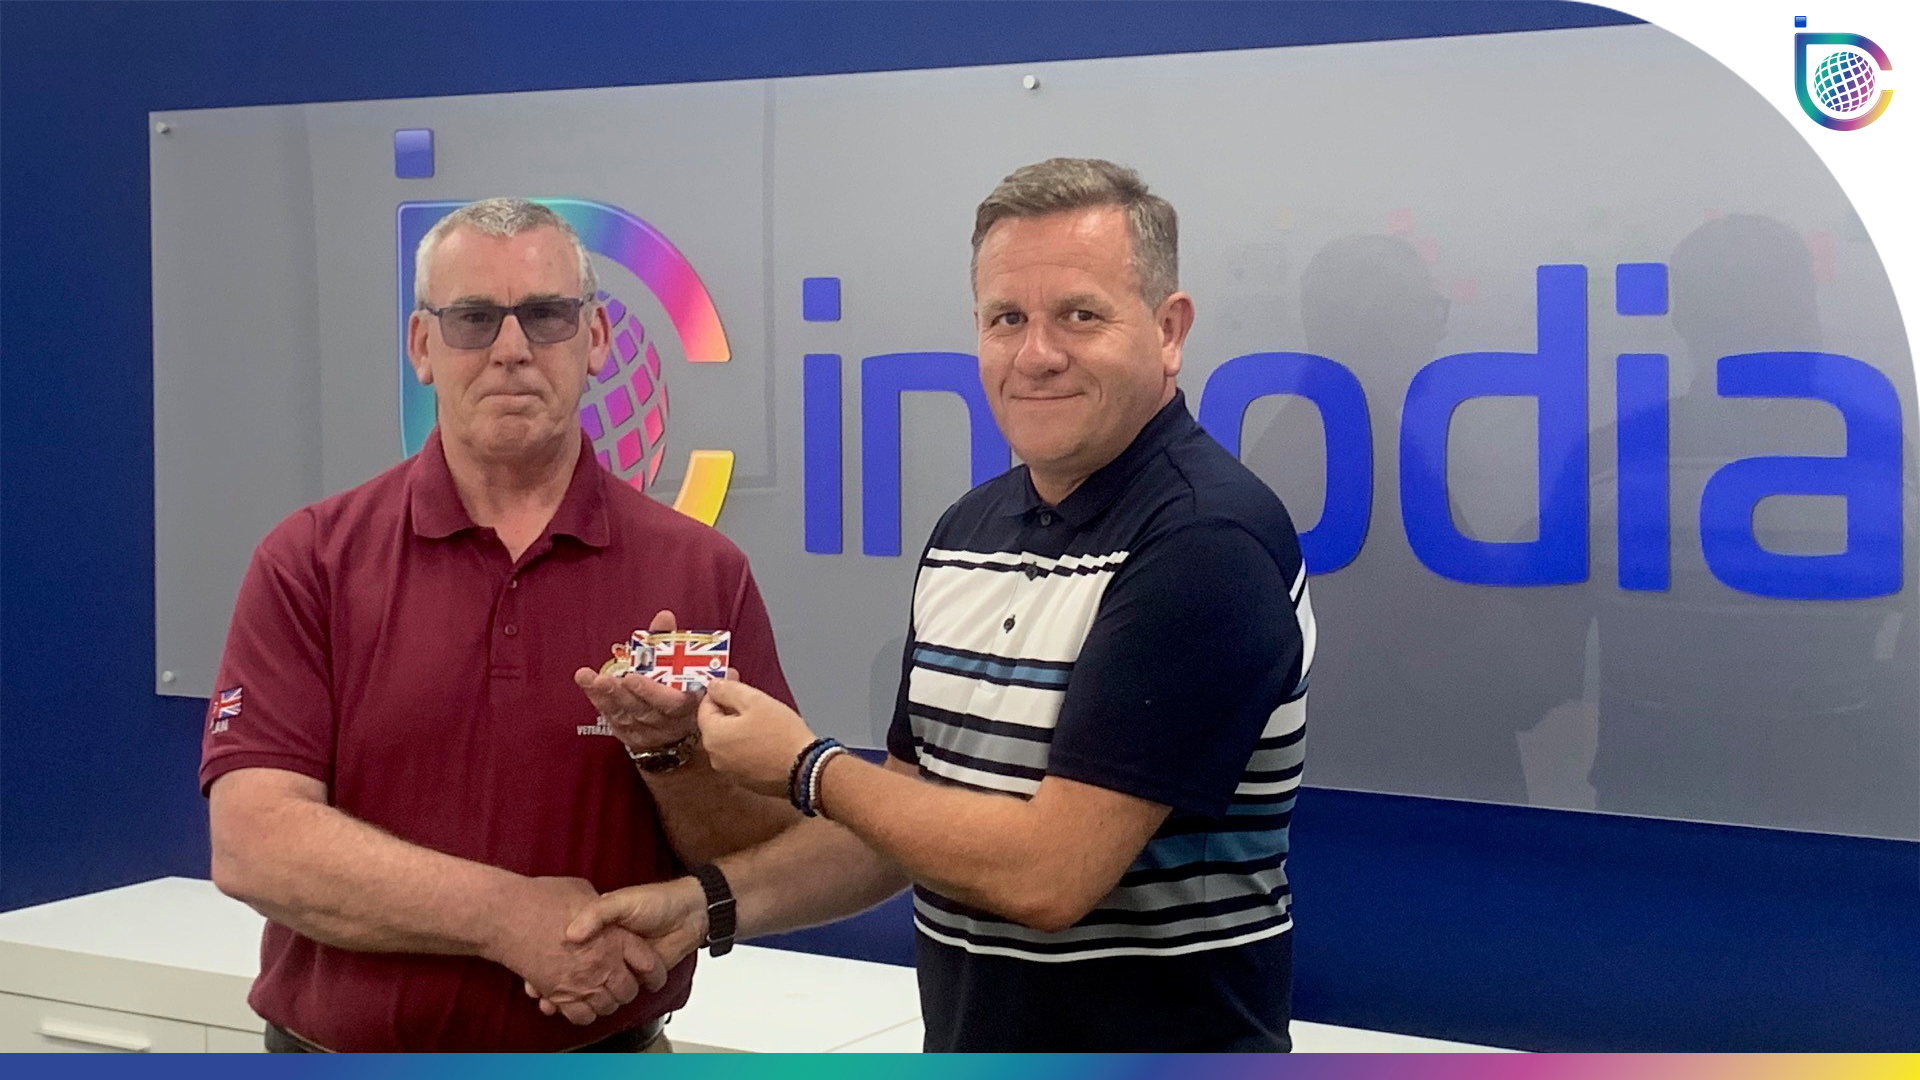 Incodia supports Skelmersdale Veterans Association, providing custom ID cards to honour local heroes